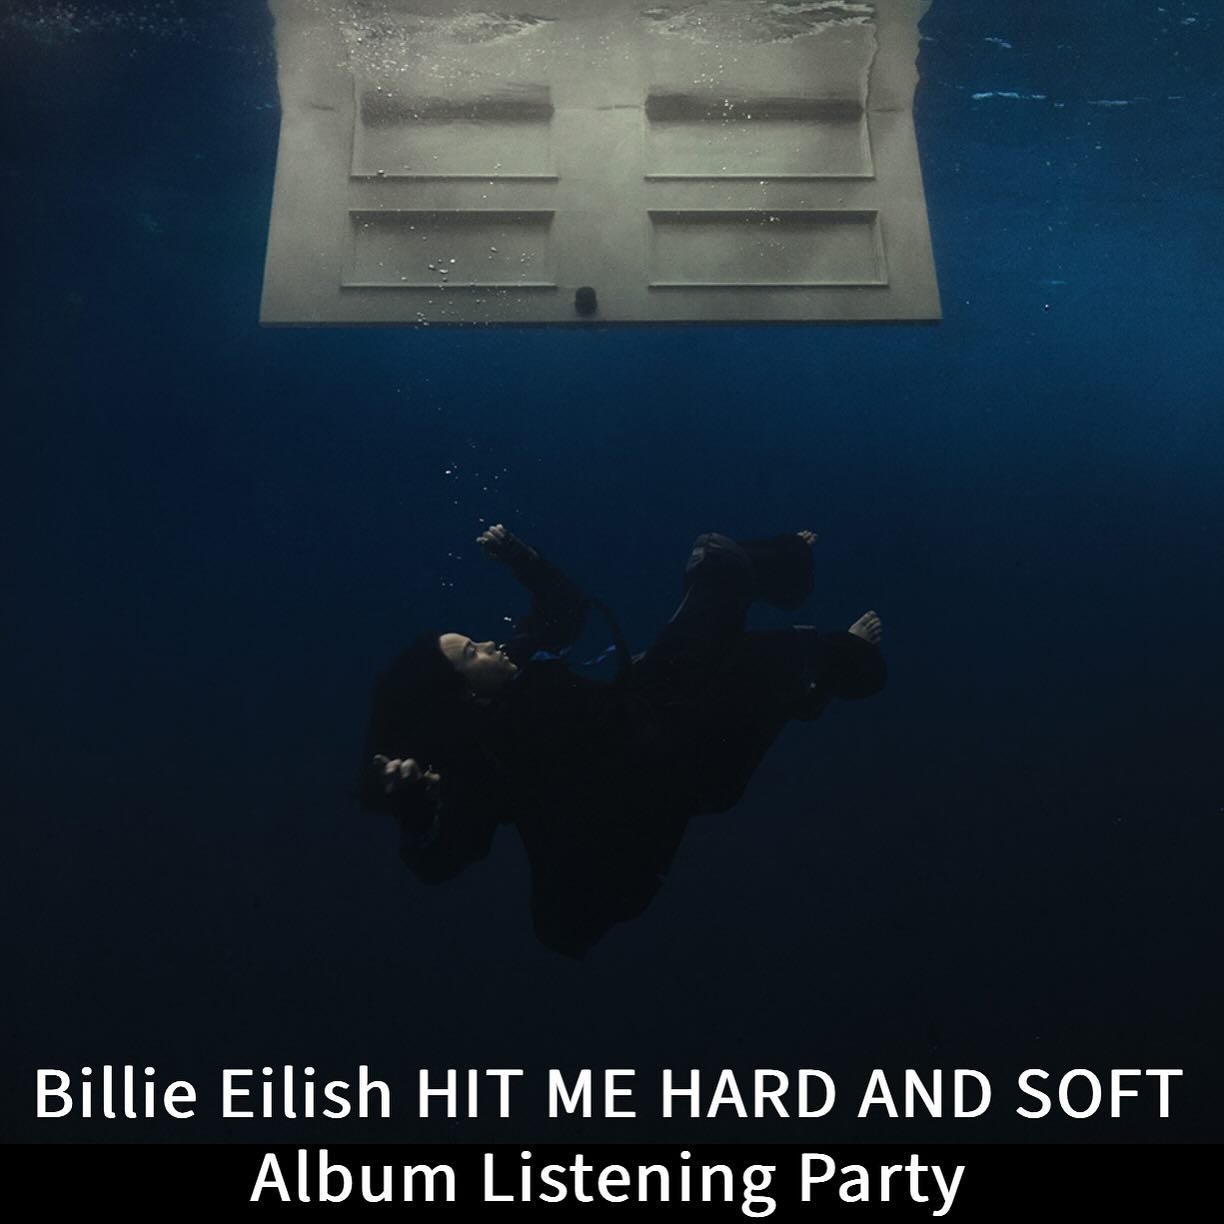 🎧Celebrate the launch of @billieeilish new album, HIT ME HARD AND SOFT, with a FREE listening party on May 15th! Visit link in bio for registration details. 

Billie&rsquo;s fans are invited to attend a special album listening party at Barclays Cent